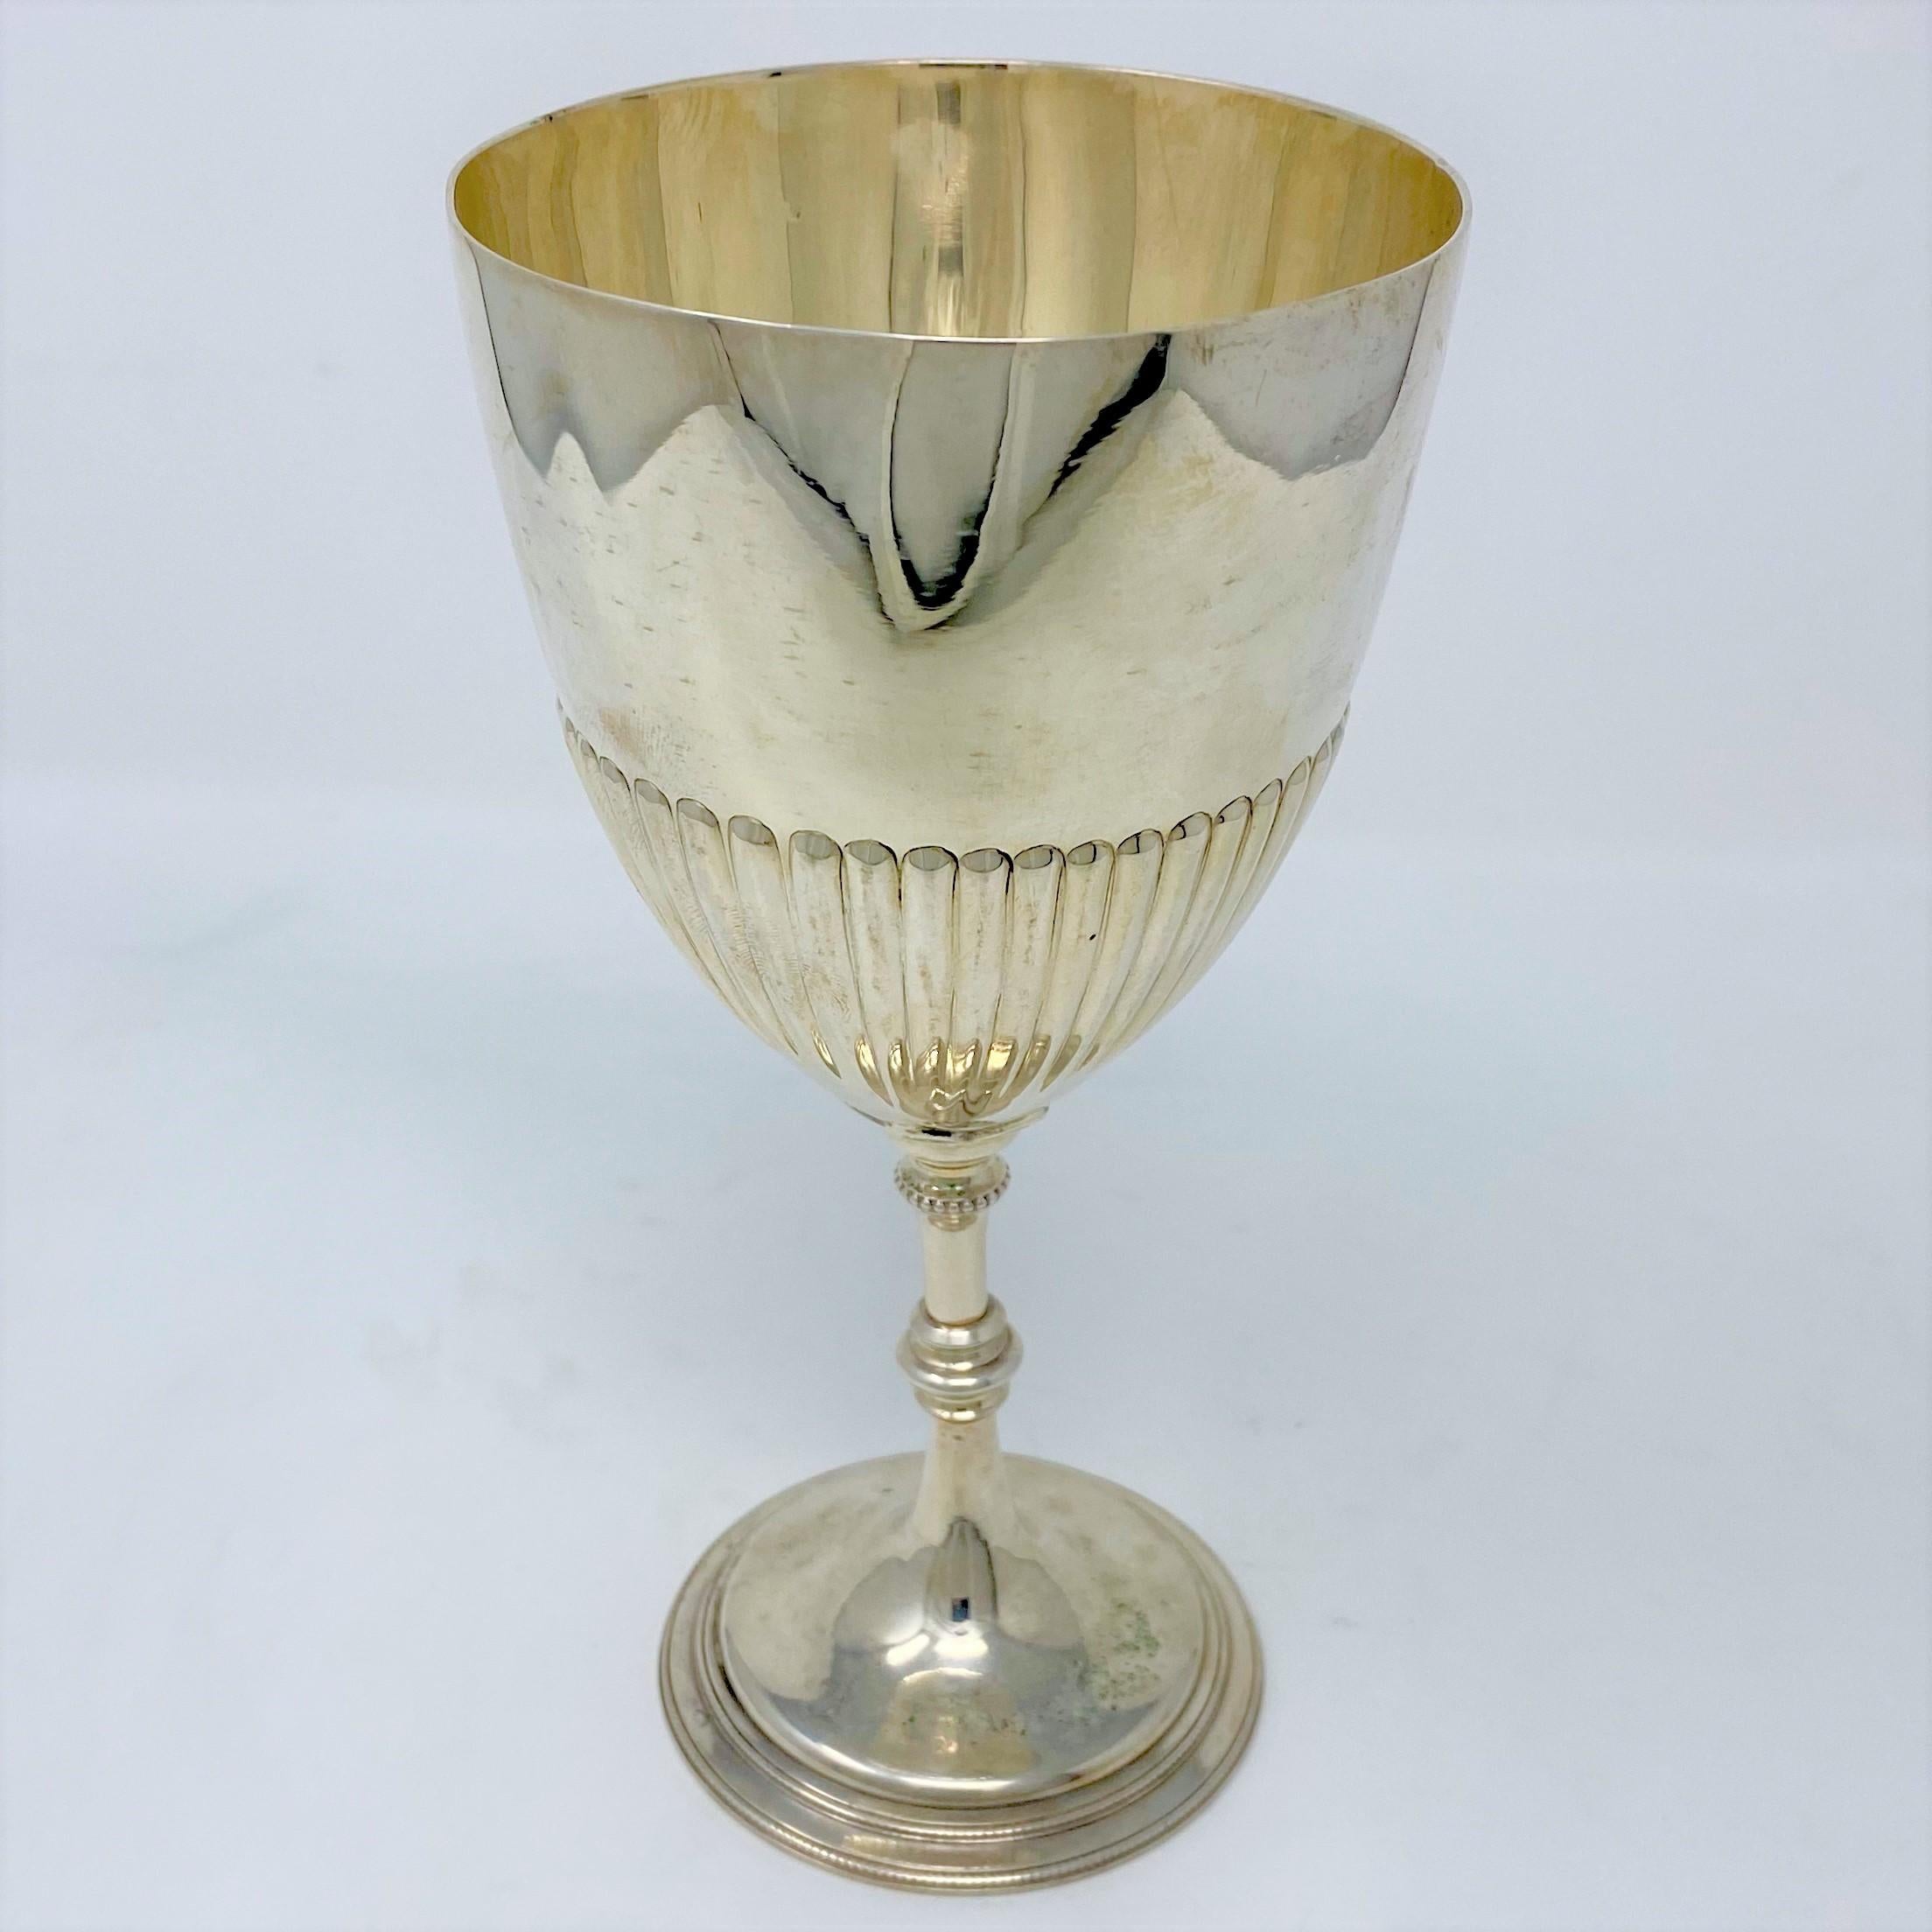 This is an attractive goblet and has room for engraving if desired.